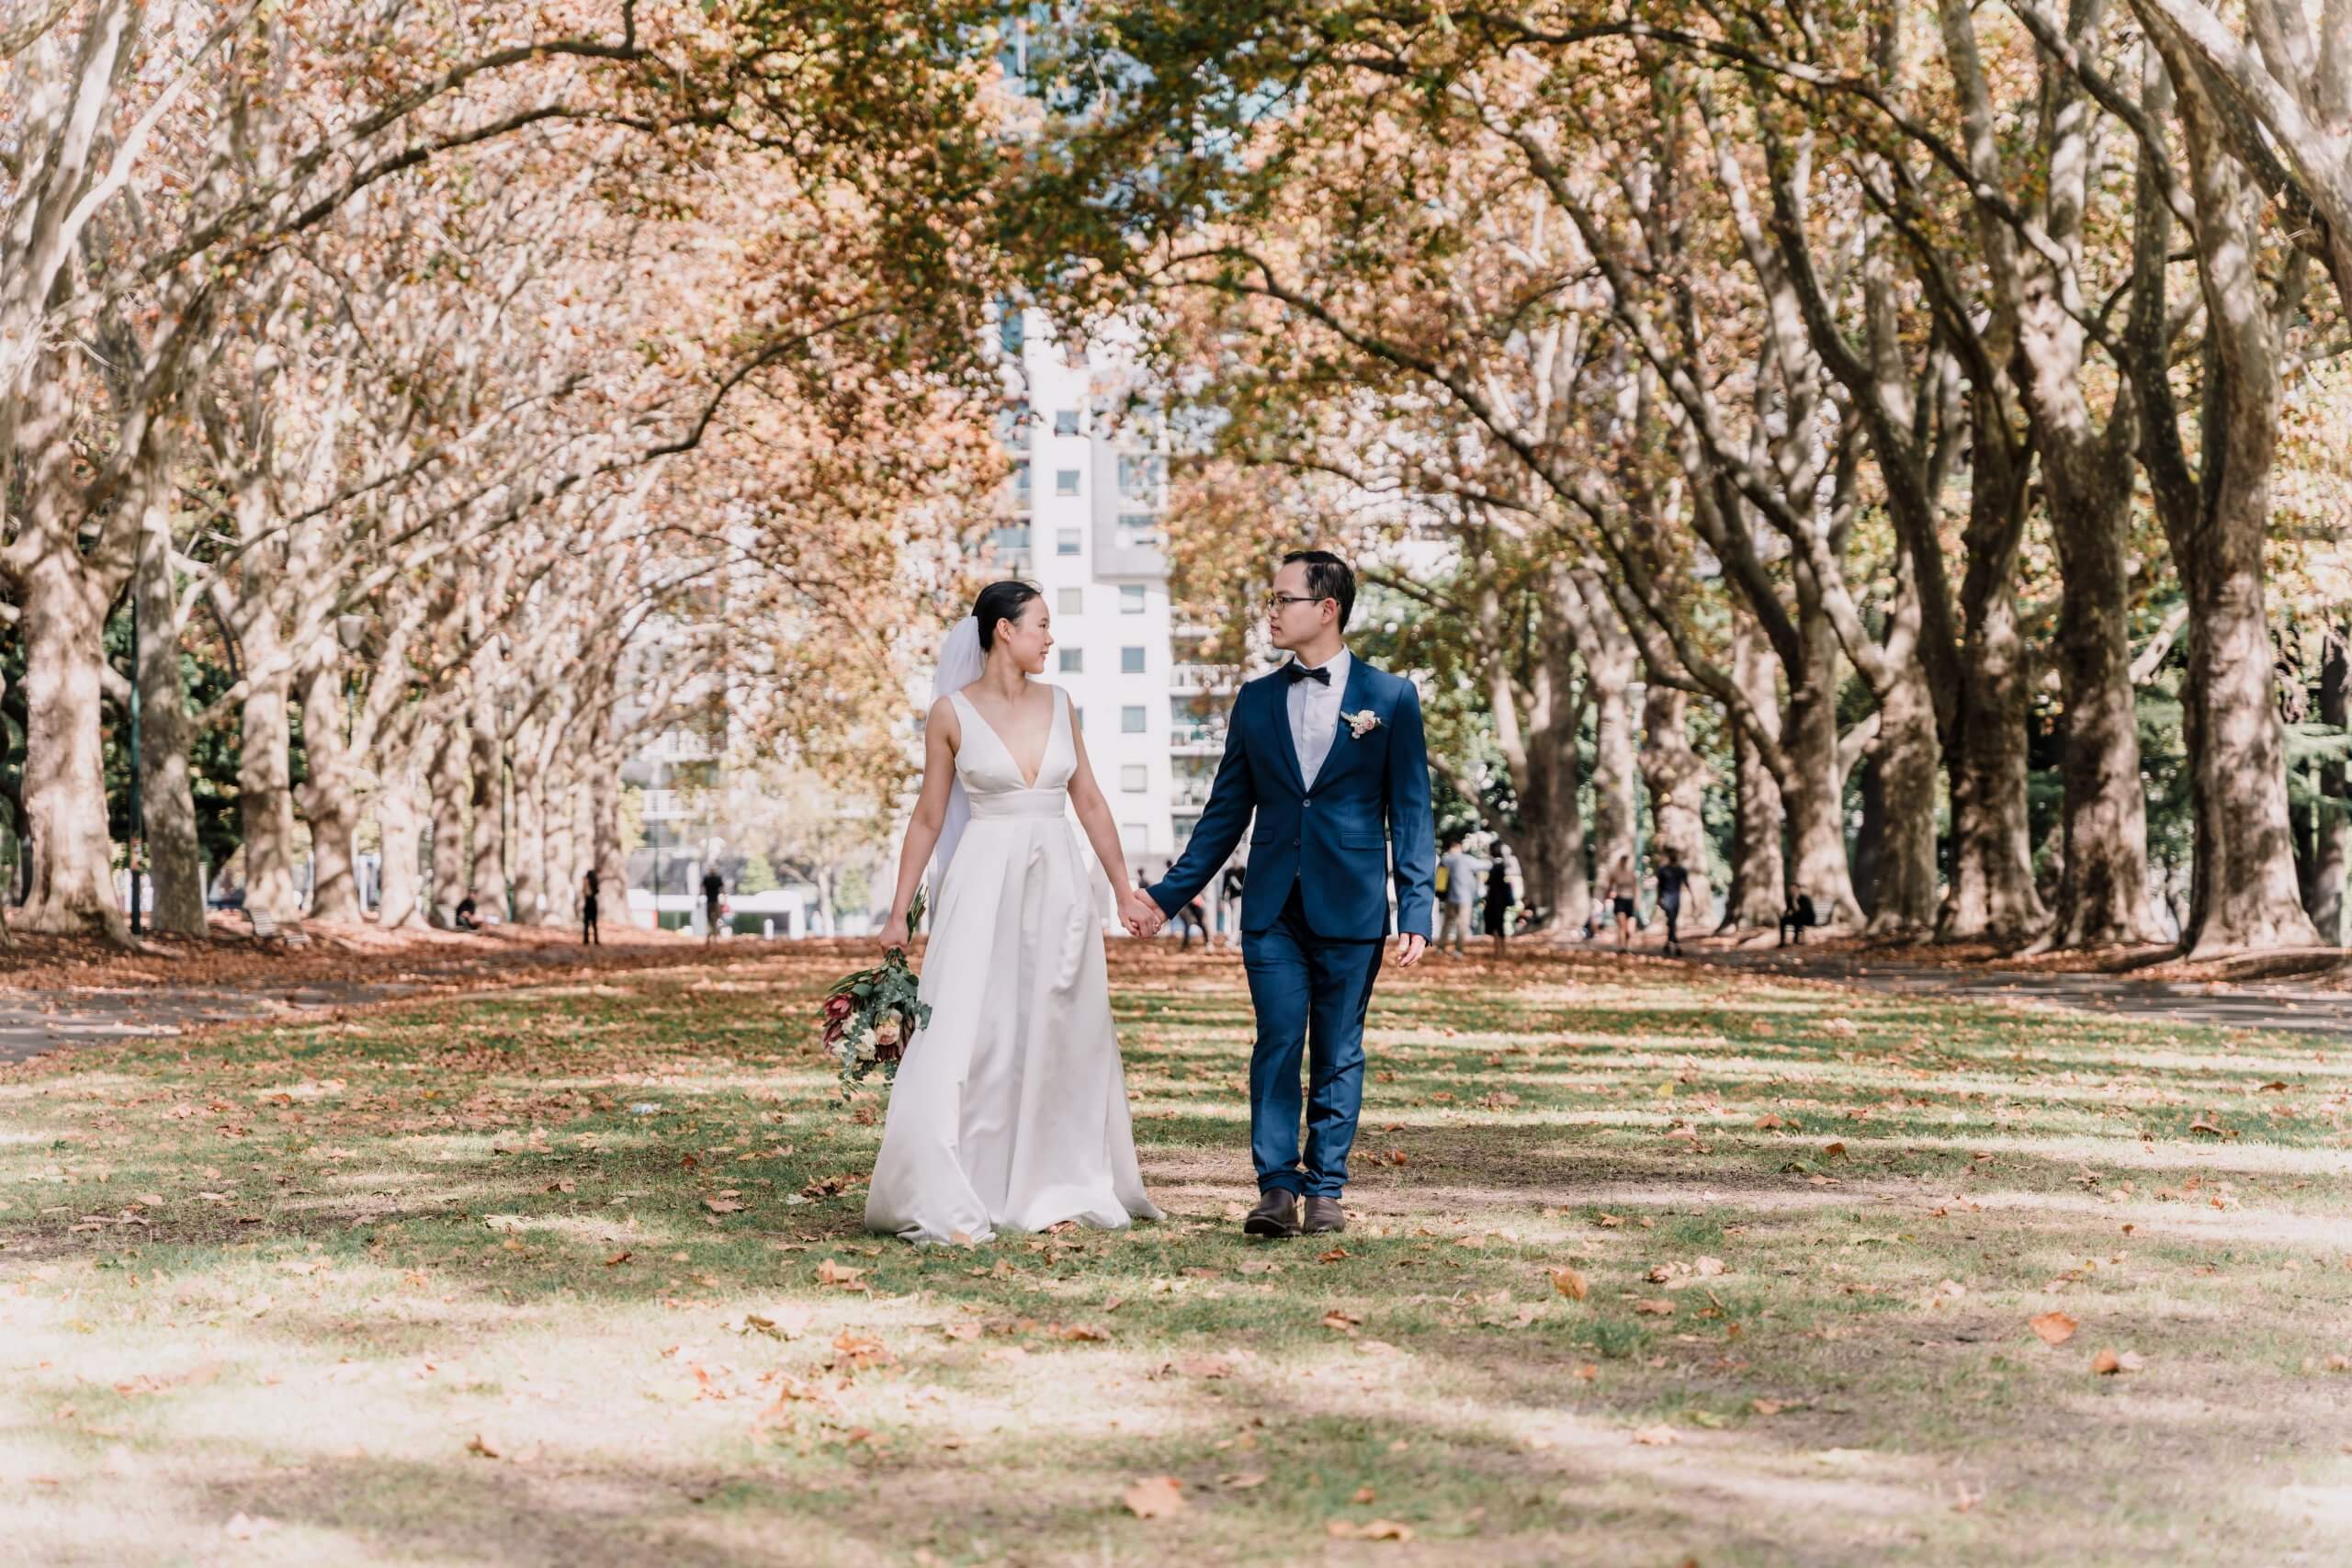 Big, tall trees line the park where the bride and groom stands in the middle holding hands.